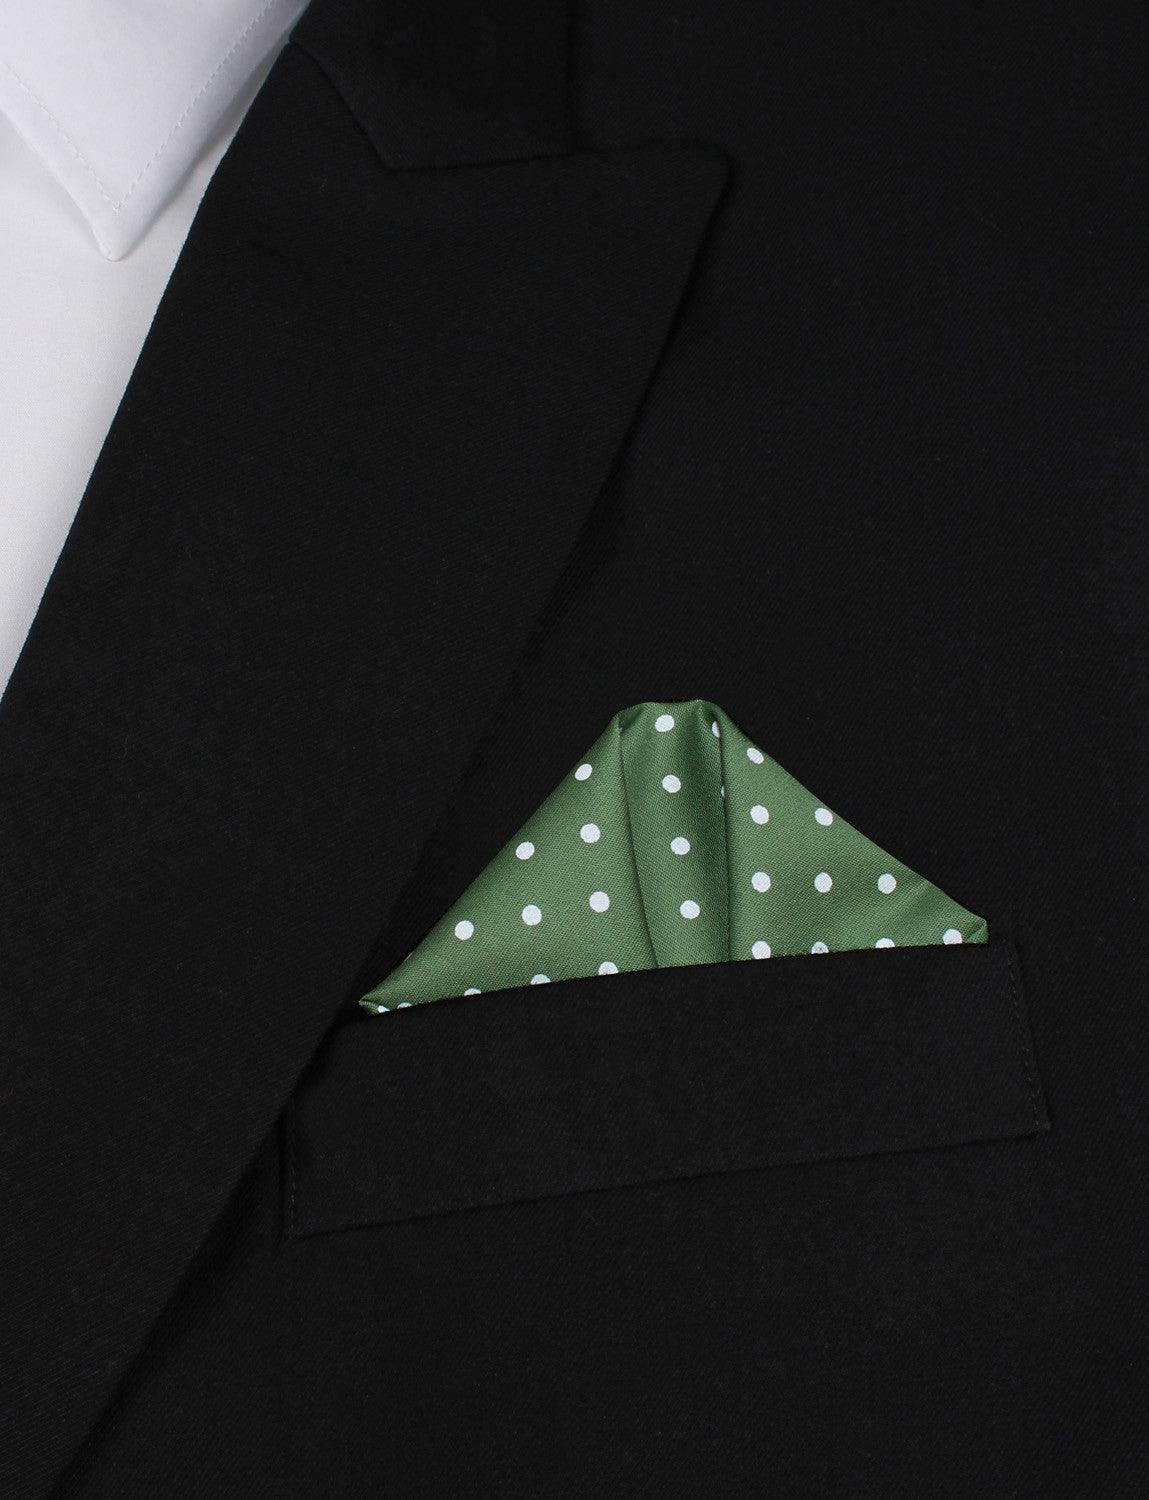 Olive Green Cotton with Mini White Polka Dots Winged Puff Pocket Square Fold